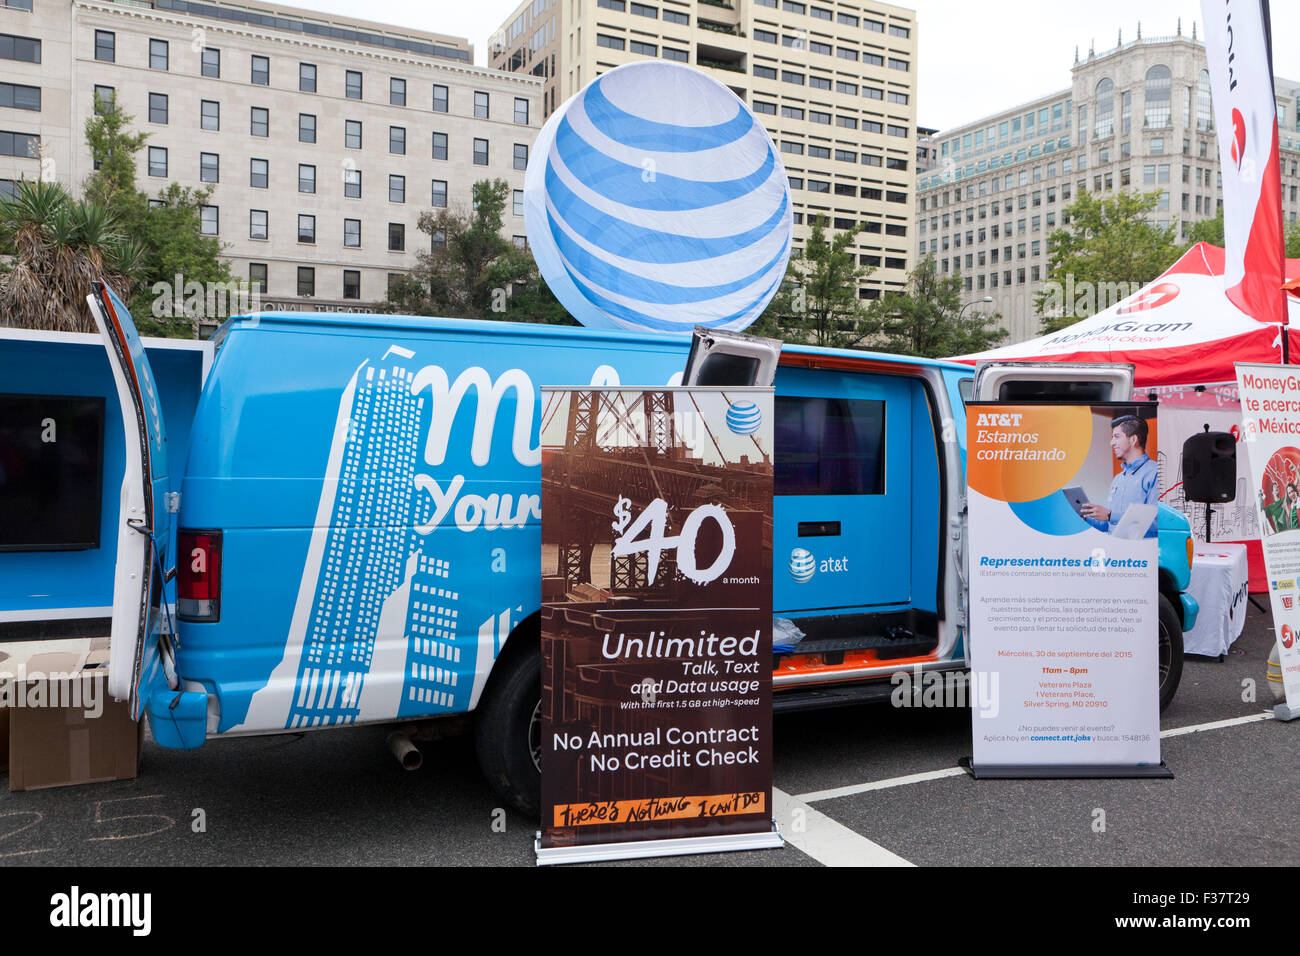 AT&T mobile phone plan promotion van at an outdoor event - Washington, DC USA Stock Photo